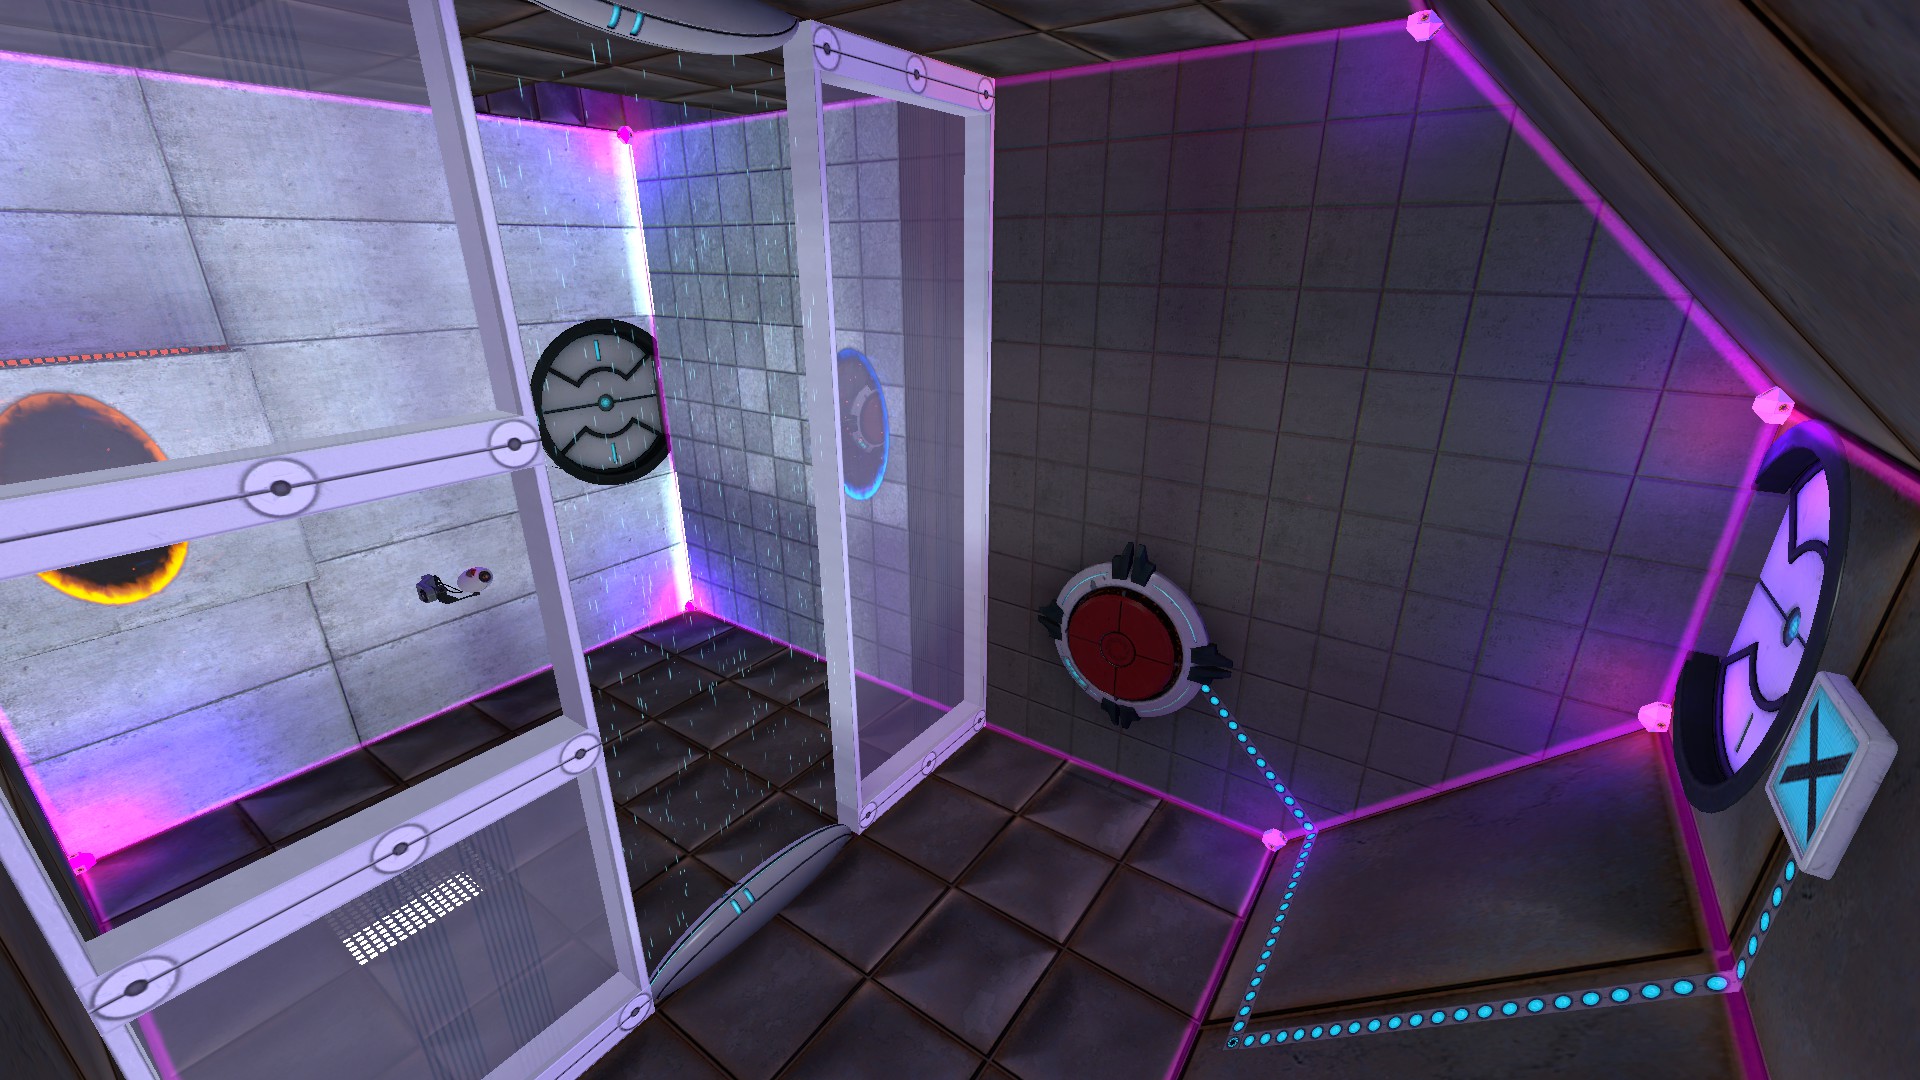 A sideways room has a sideways fling puzzle on one side, an emancipation grid in the middle, and a button connected to the exit door on the other side.